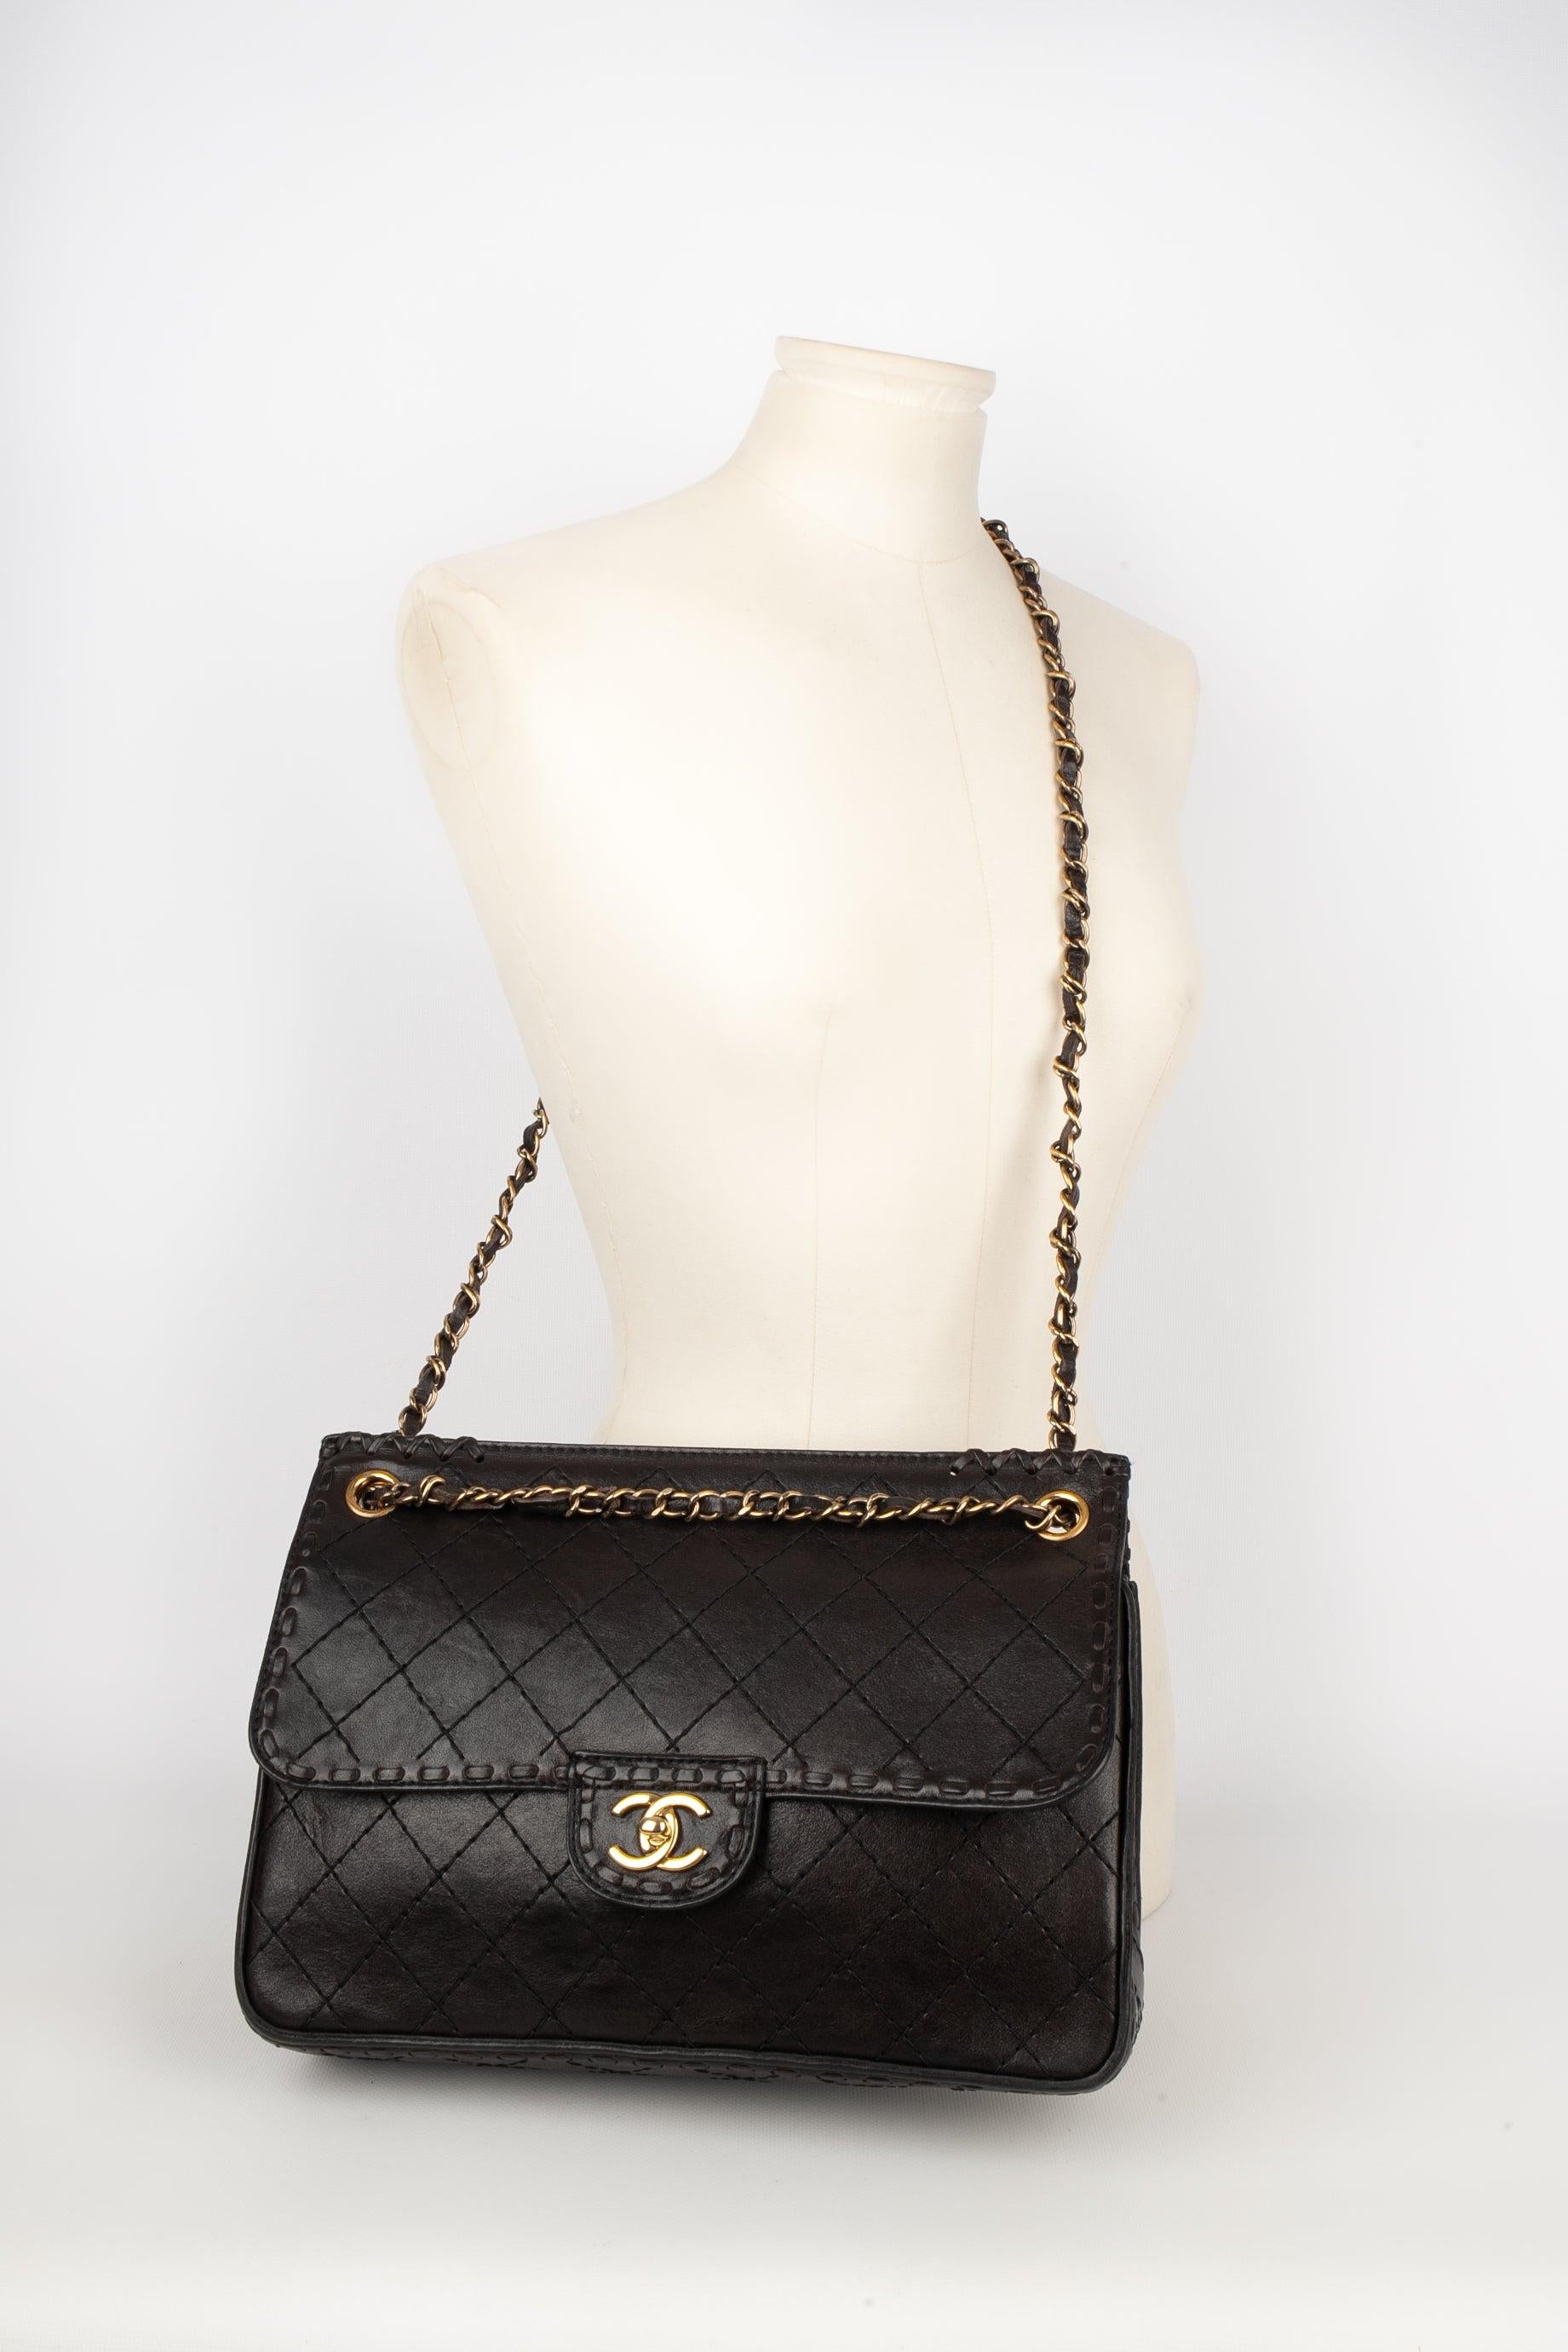 Chanel Timeless Quilted Leather Bag, 2013/2014 For Sale 9